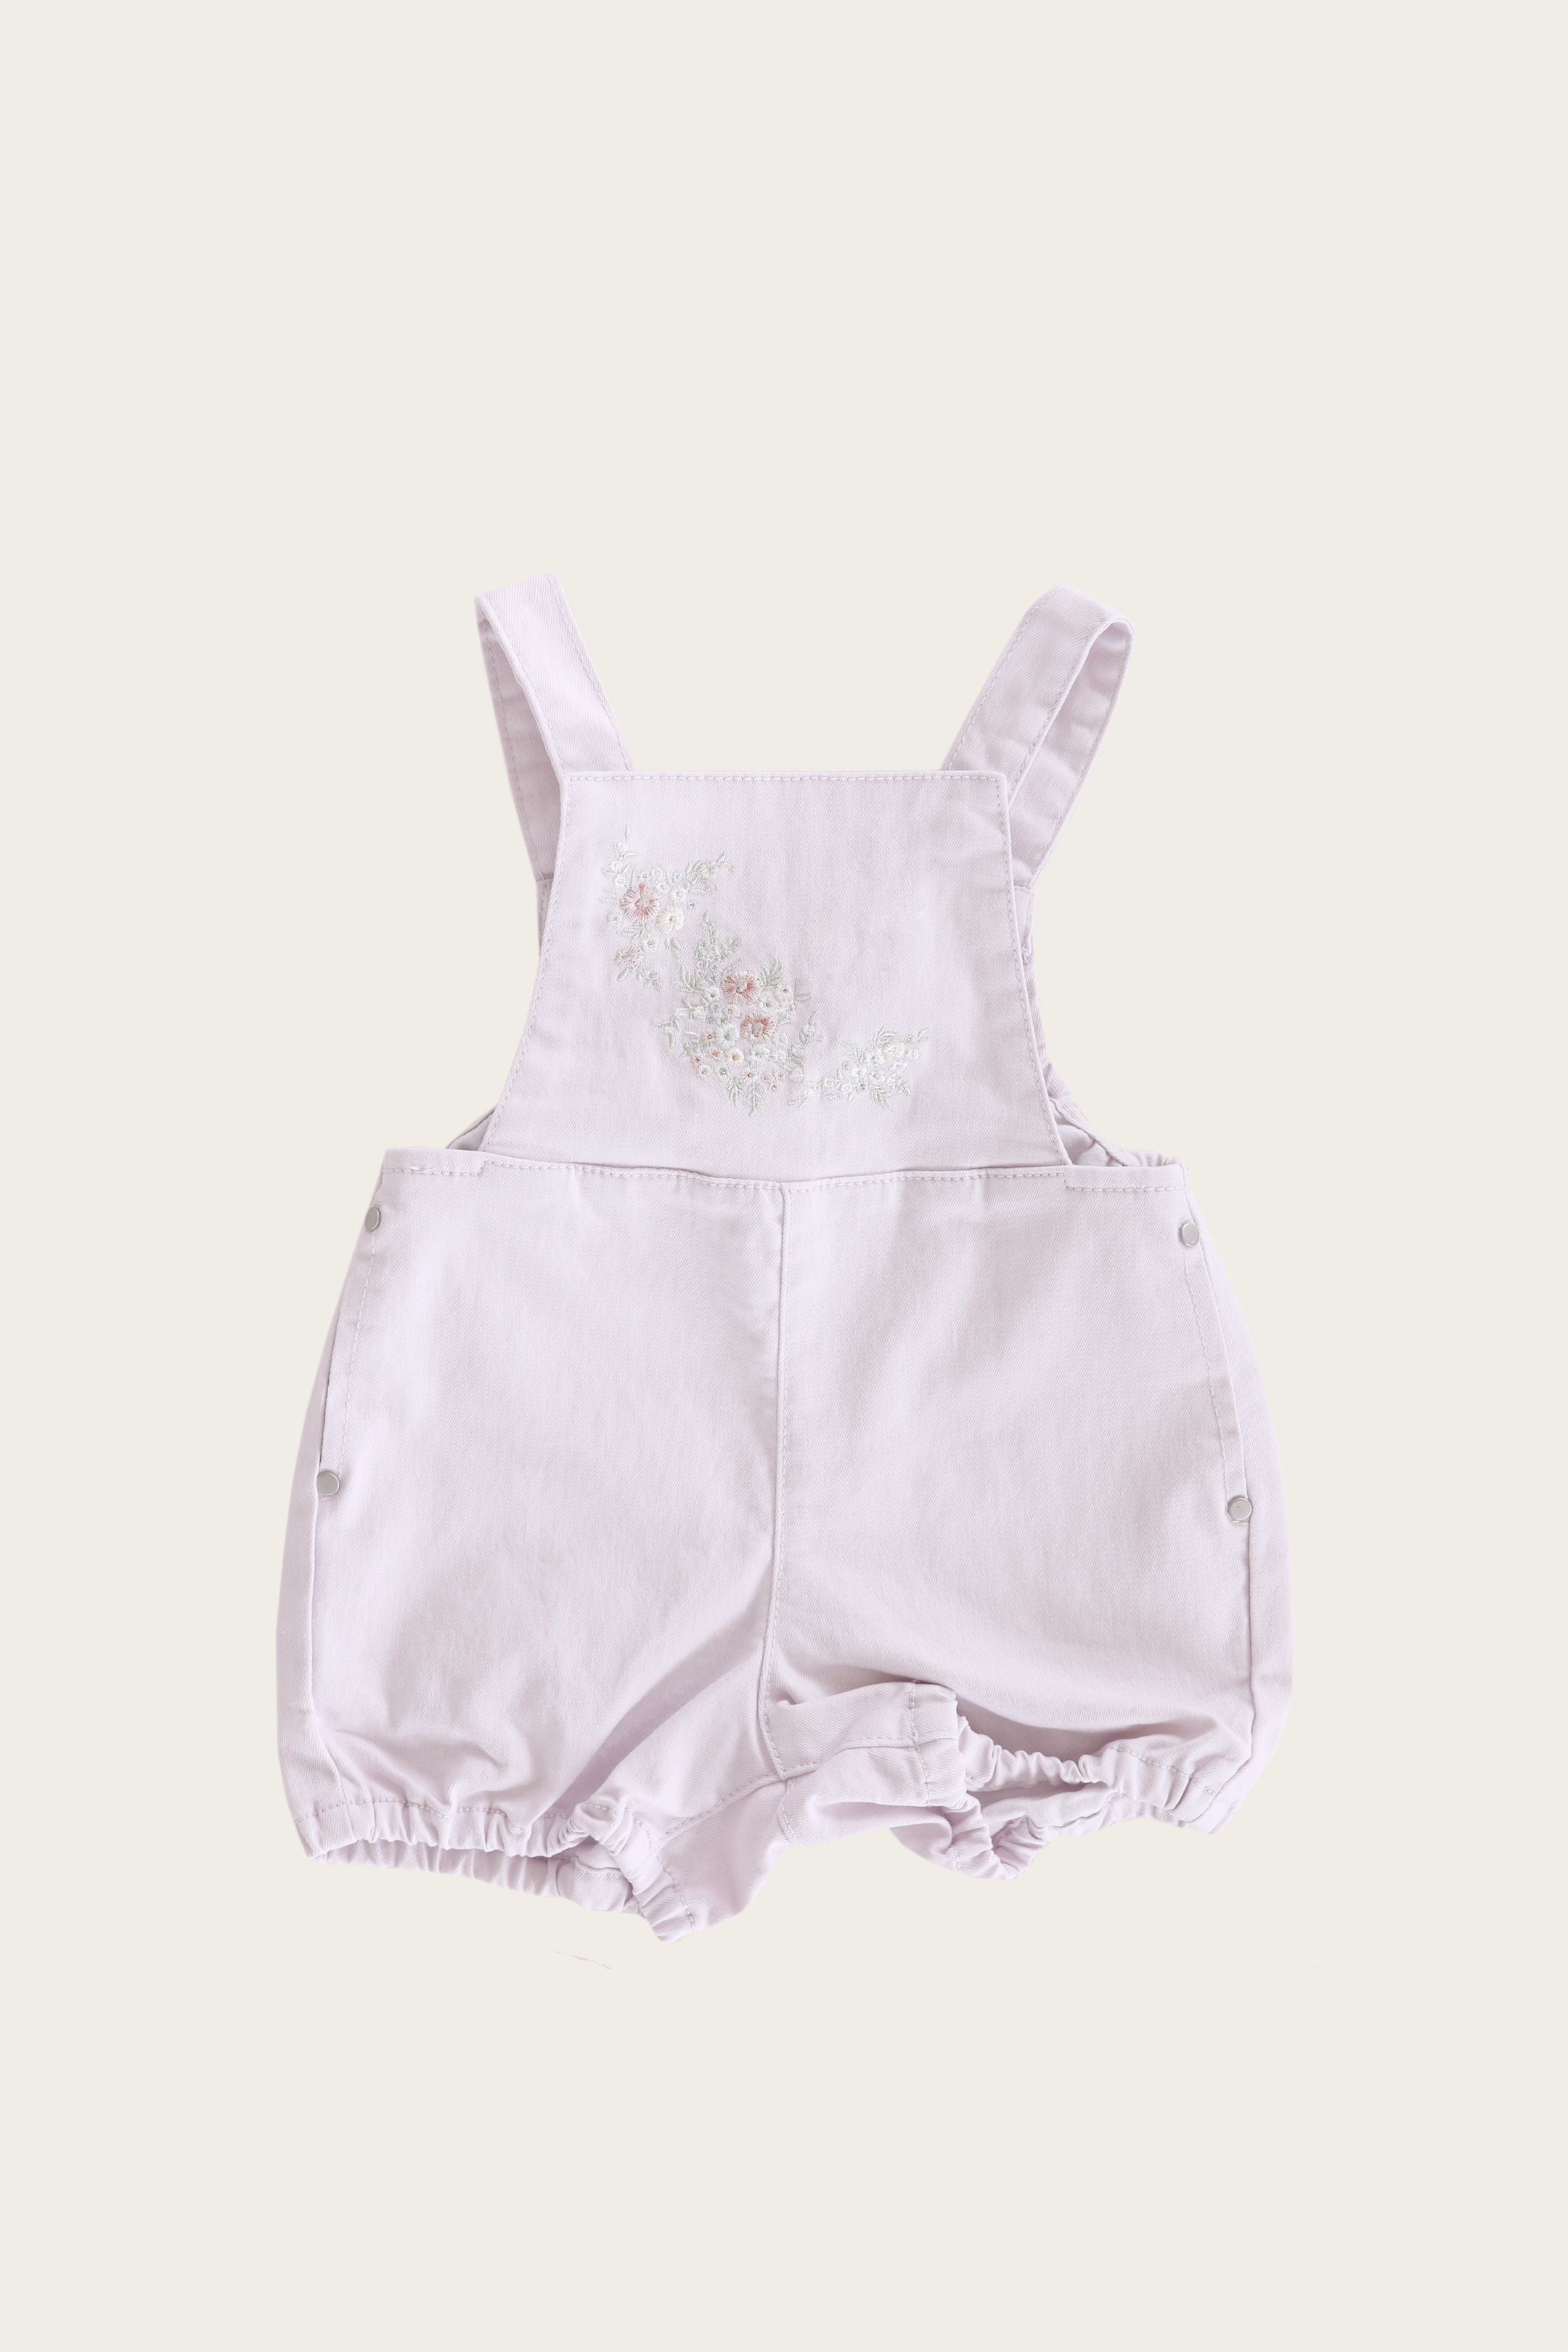 Charlotte Playsuit in Soft Lilac by Jamie Kay